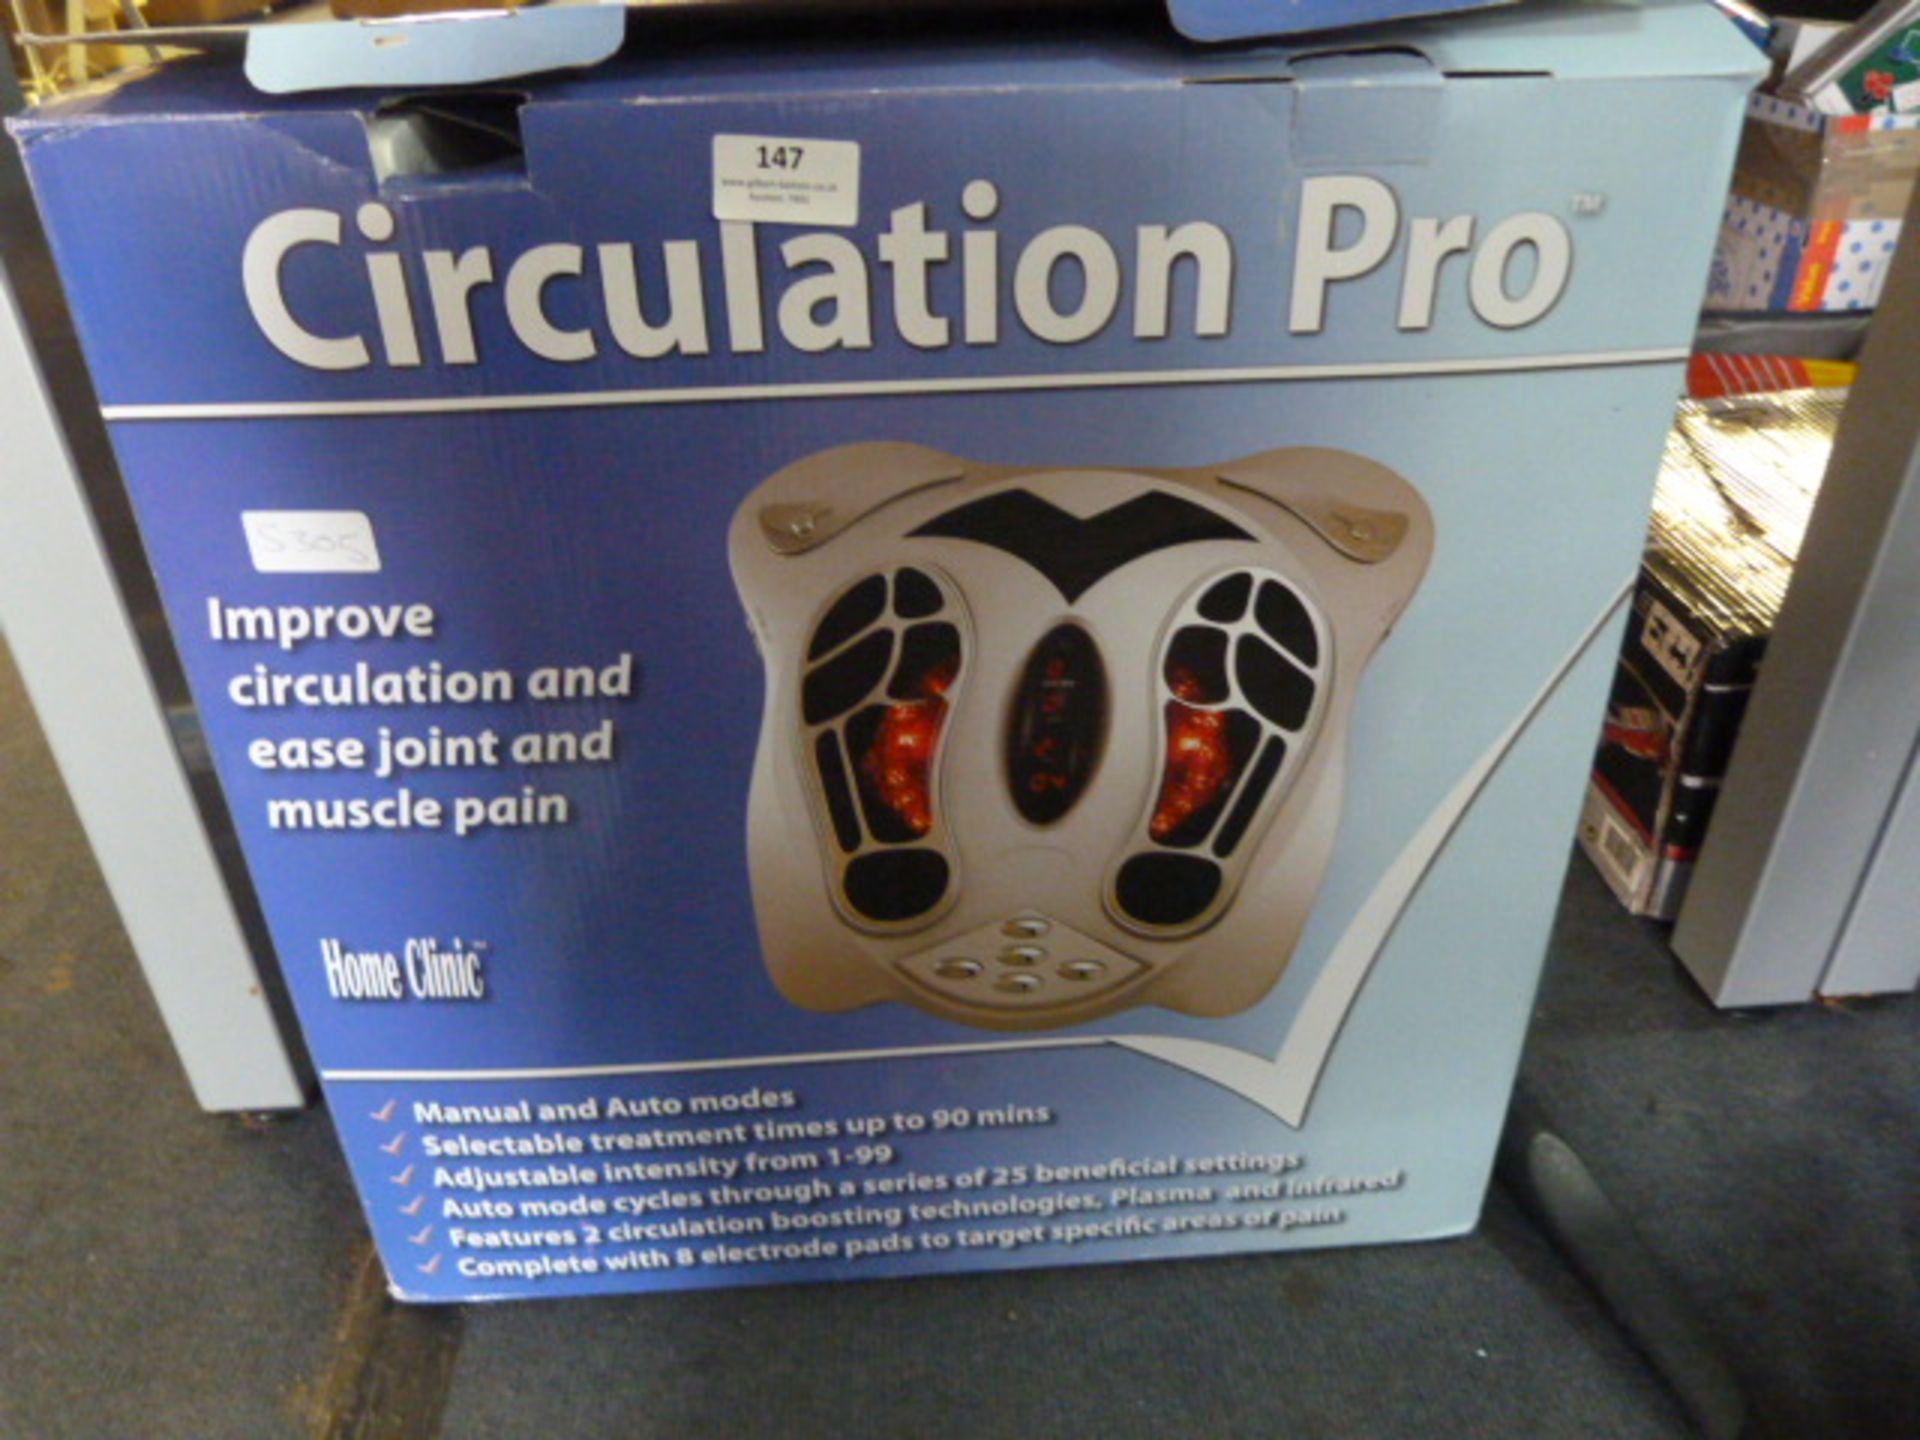 Home Clinic Circulation Pro Foot Massager